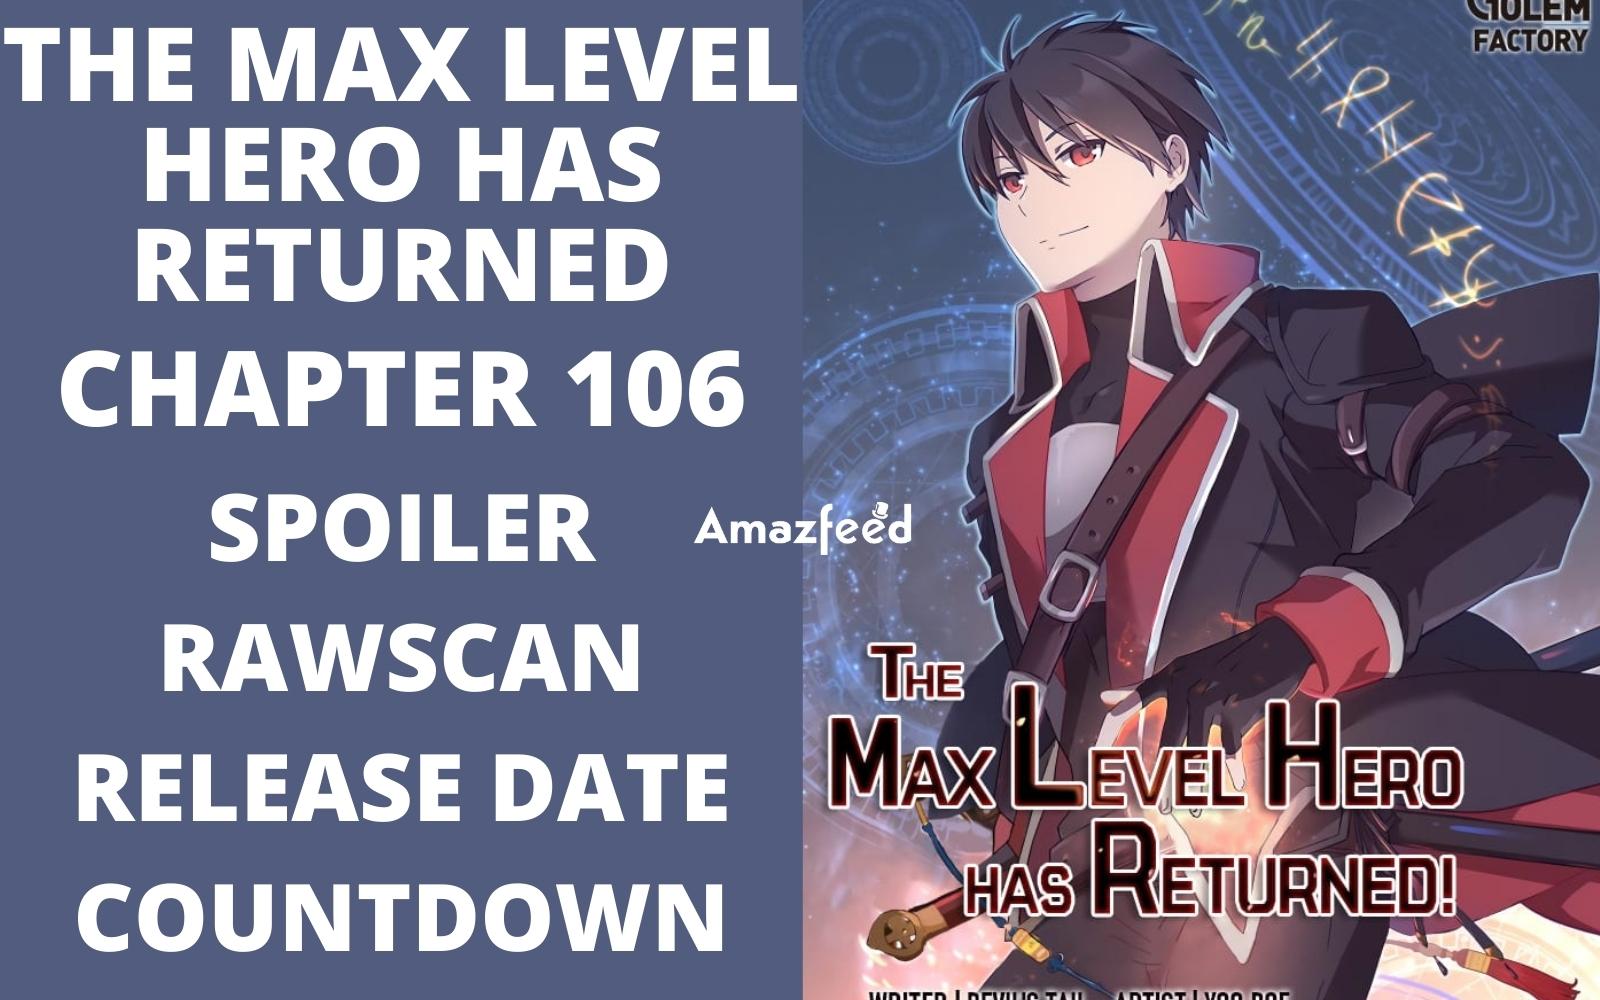 The Max Level Hero Has Returned Chapter 106 Spoiler, Release Date, Raw Scan, Countdown, Color Page